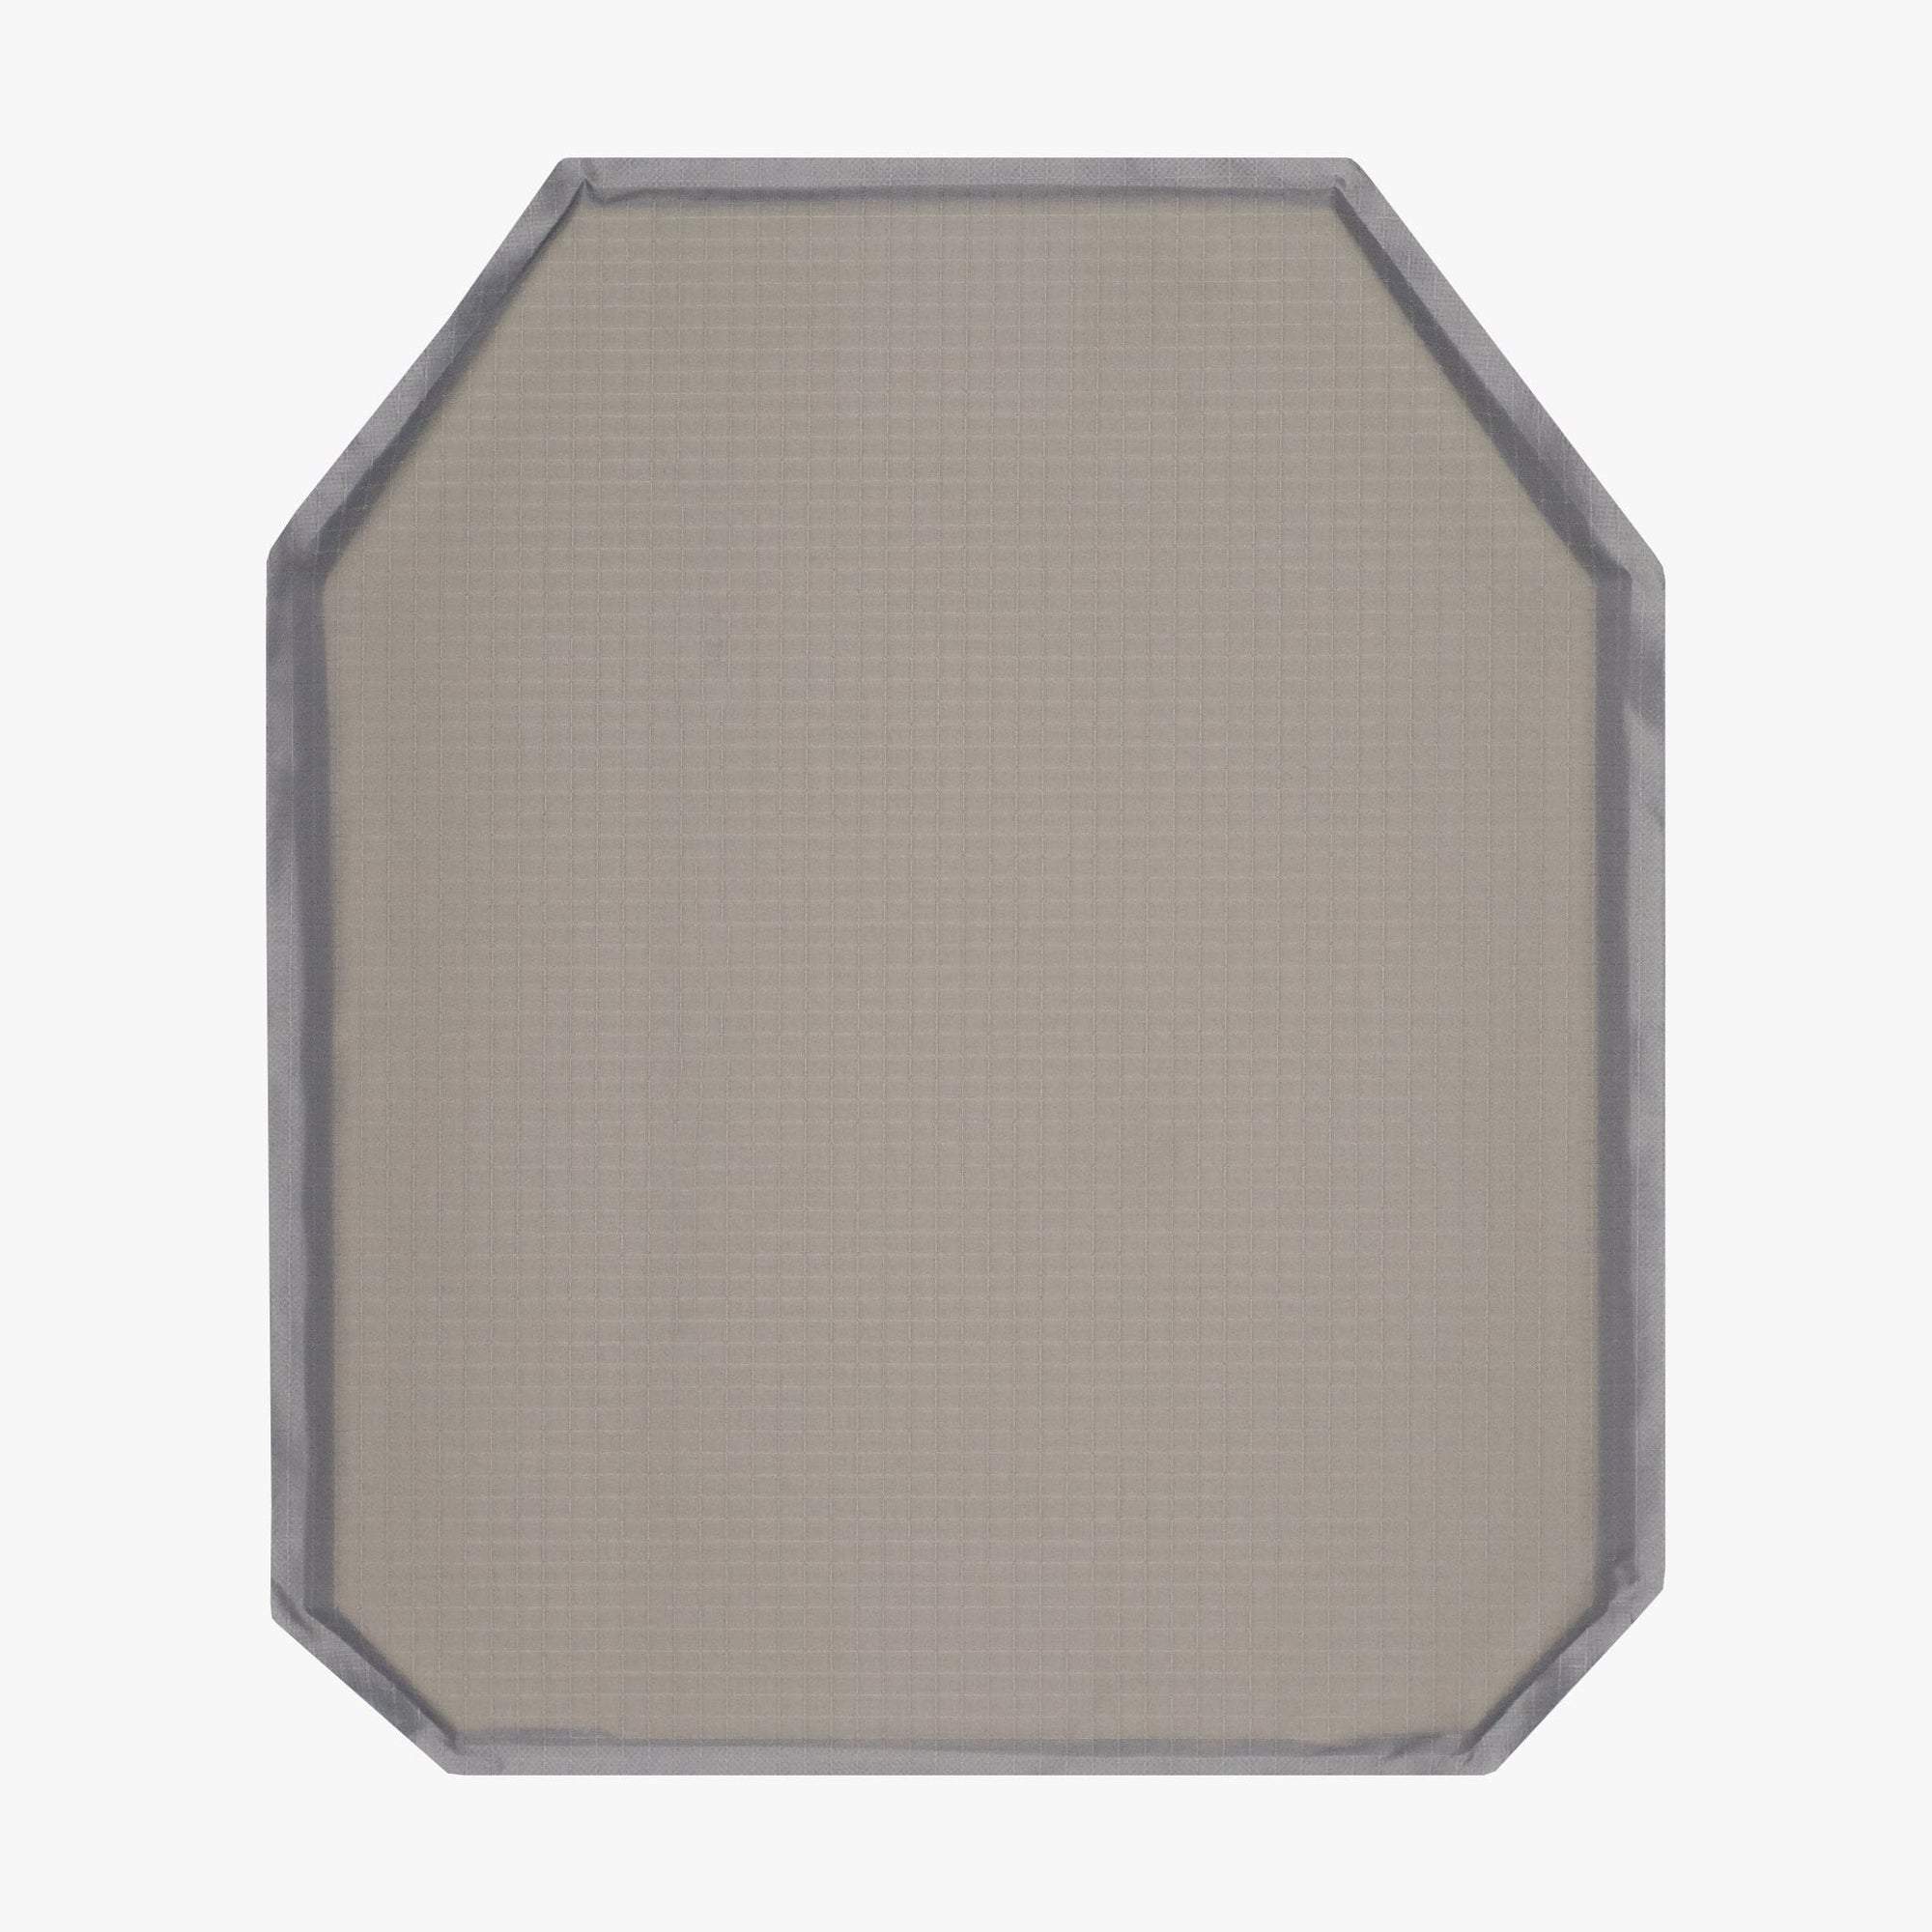 Use this soft body armor to protect yourself from spall. This ballistic plates can also be used as a trauma pad behind your armor plates. 